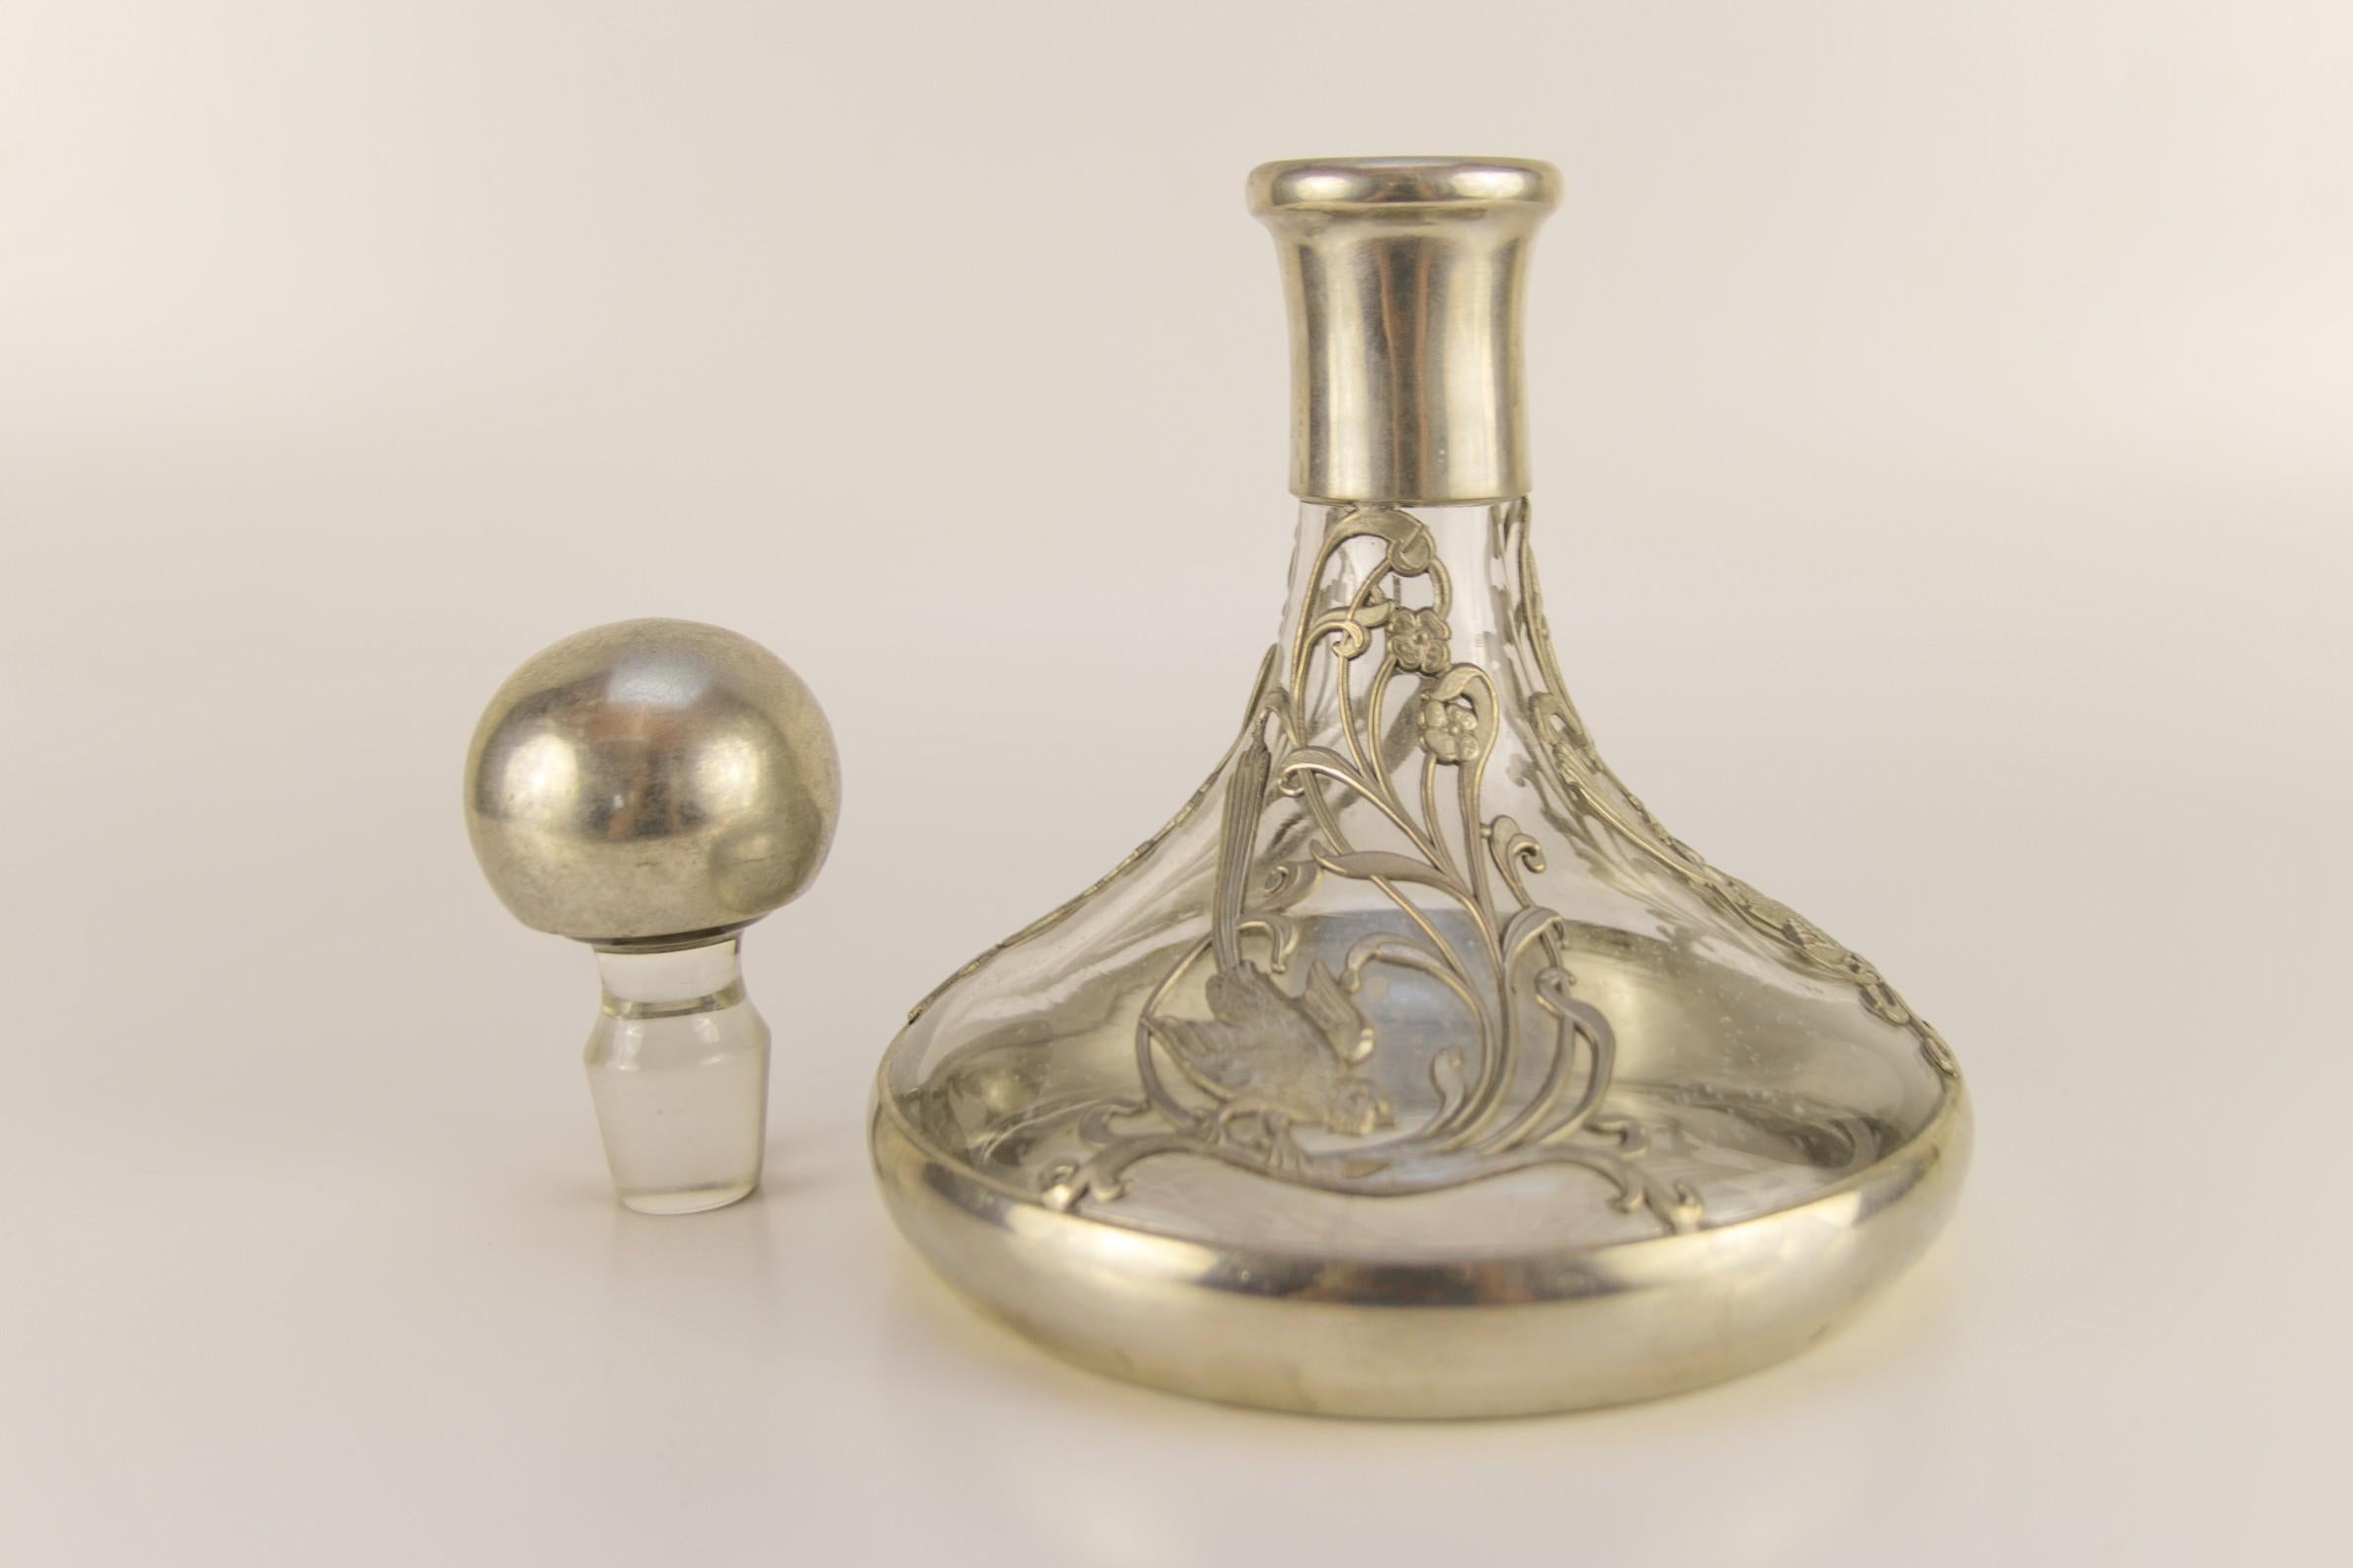 Belgian Art Nouveau Style Glass and Pewter Decanter